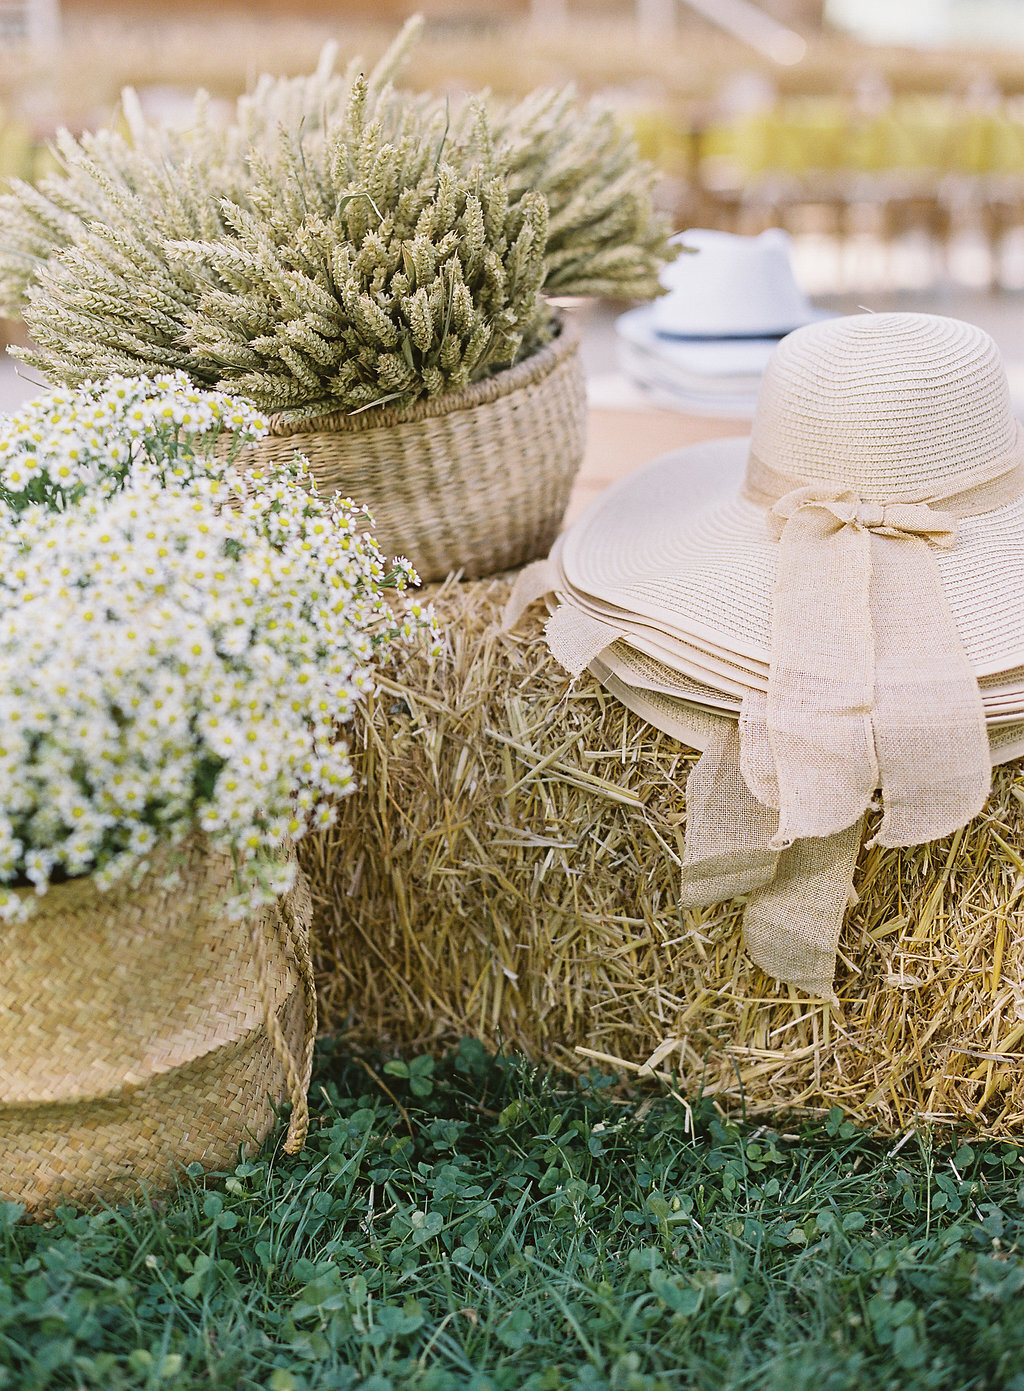 Rustic furniture, straw, linen and wildflowers